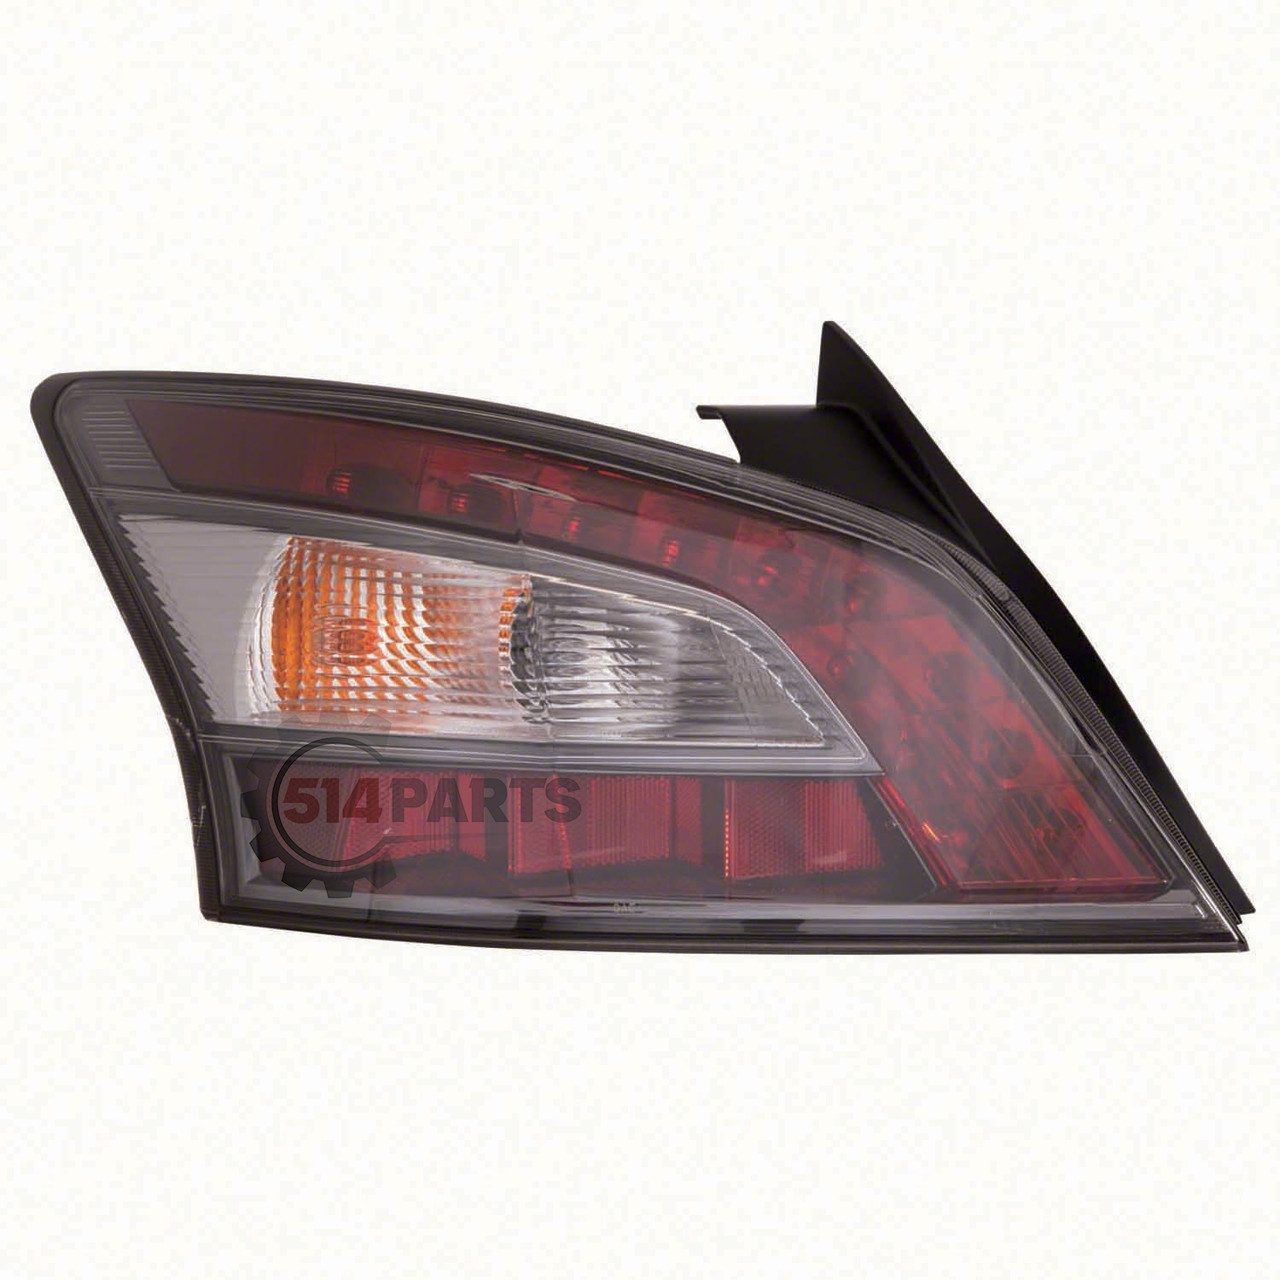 2012 - 2014 NISSAN MAXIMA TAIL LIGHTS High Quality - PHARES ARRIERE Haute Qualite